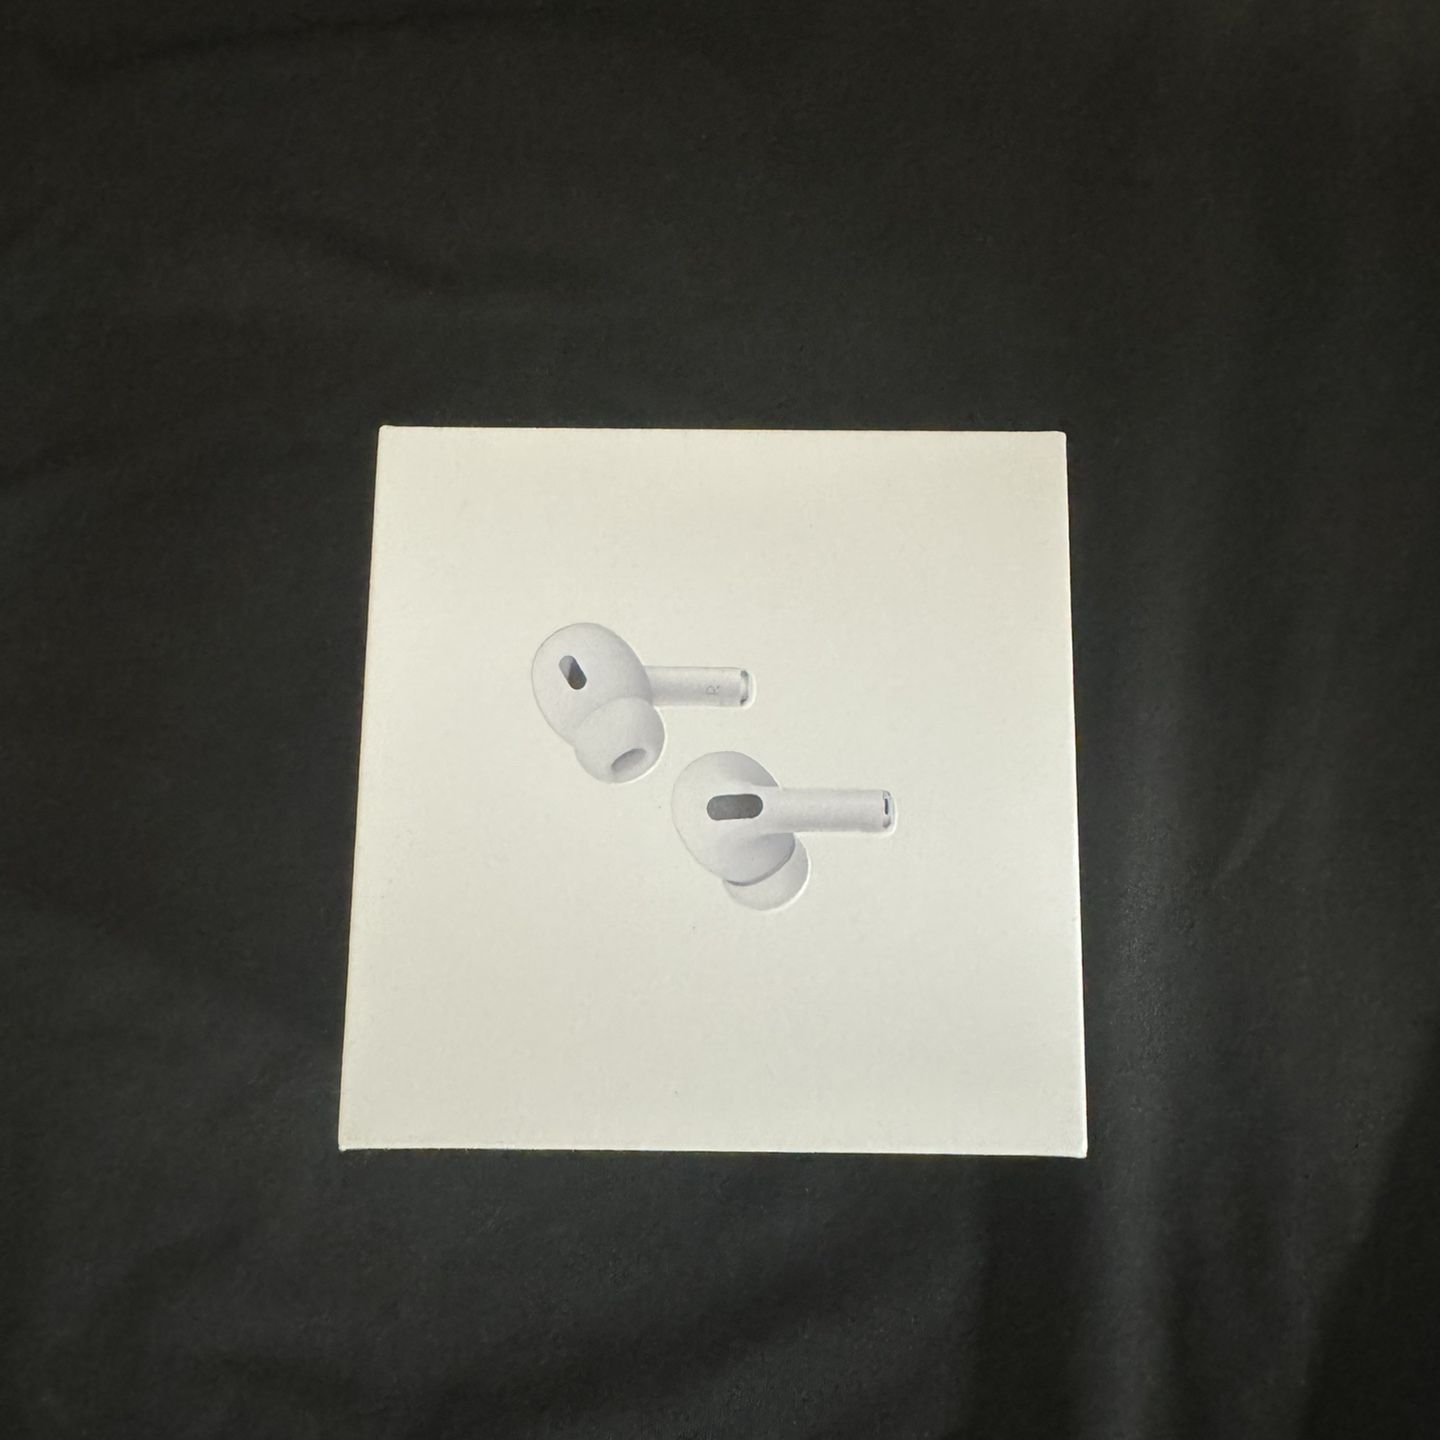 SEND BEST OFFER! AirPods Pro (SEALED IN BOX)